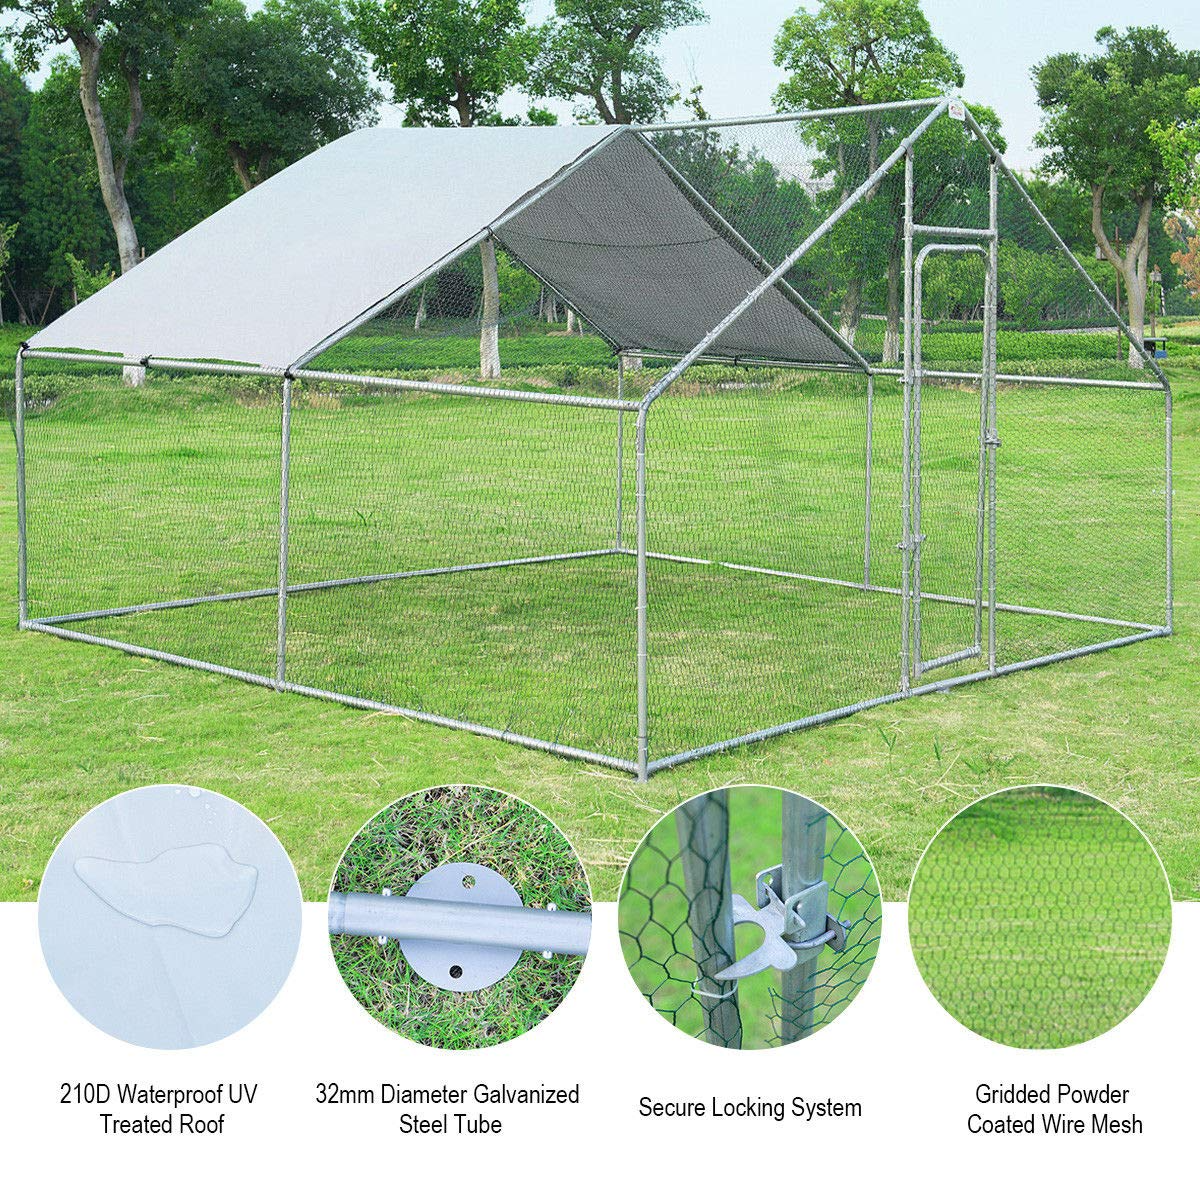 Giantex Large Metal Chicken Coop Walk-in Chicken Coops Run House Shade Cage with Waterproof and Anti-Ultraviolet Cover